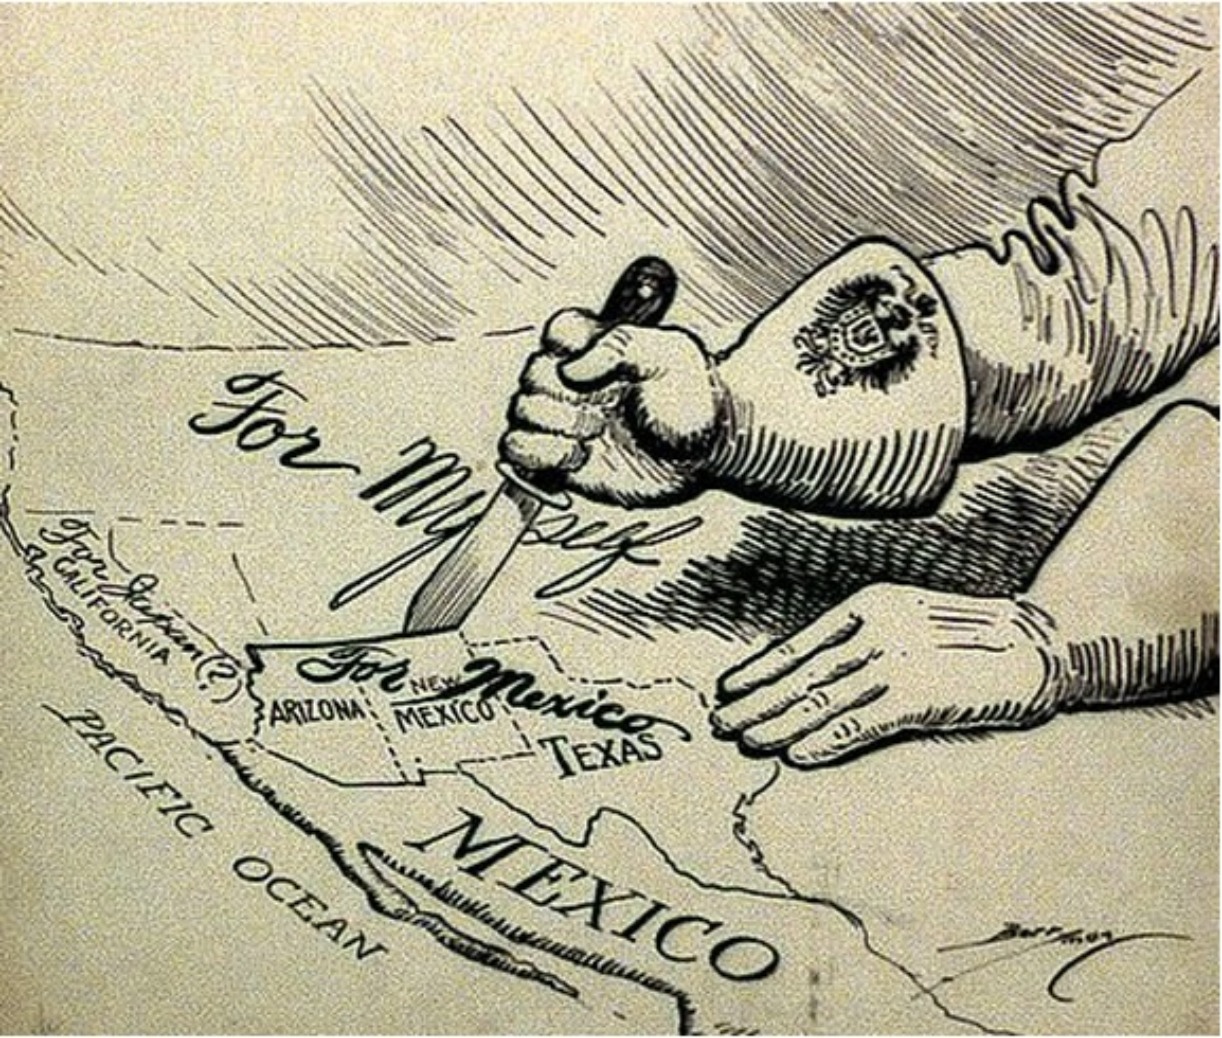 A Second MexicanAmerican War? In World War I Germany Tried to Make it